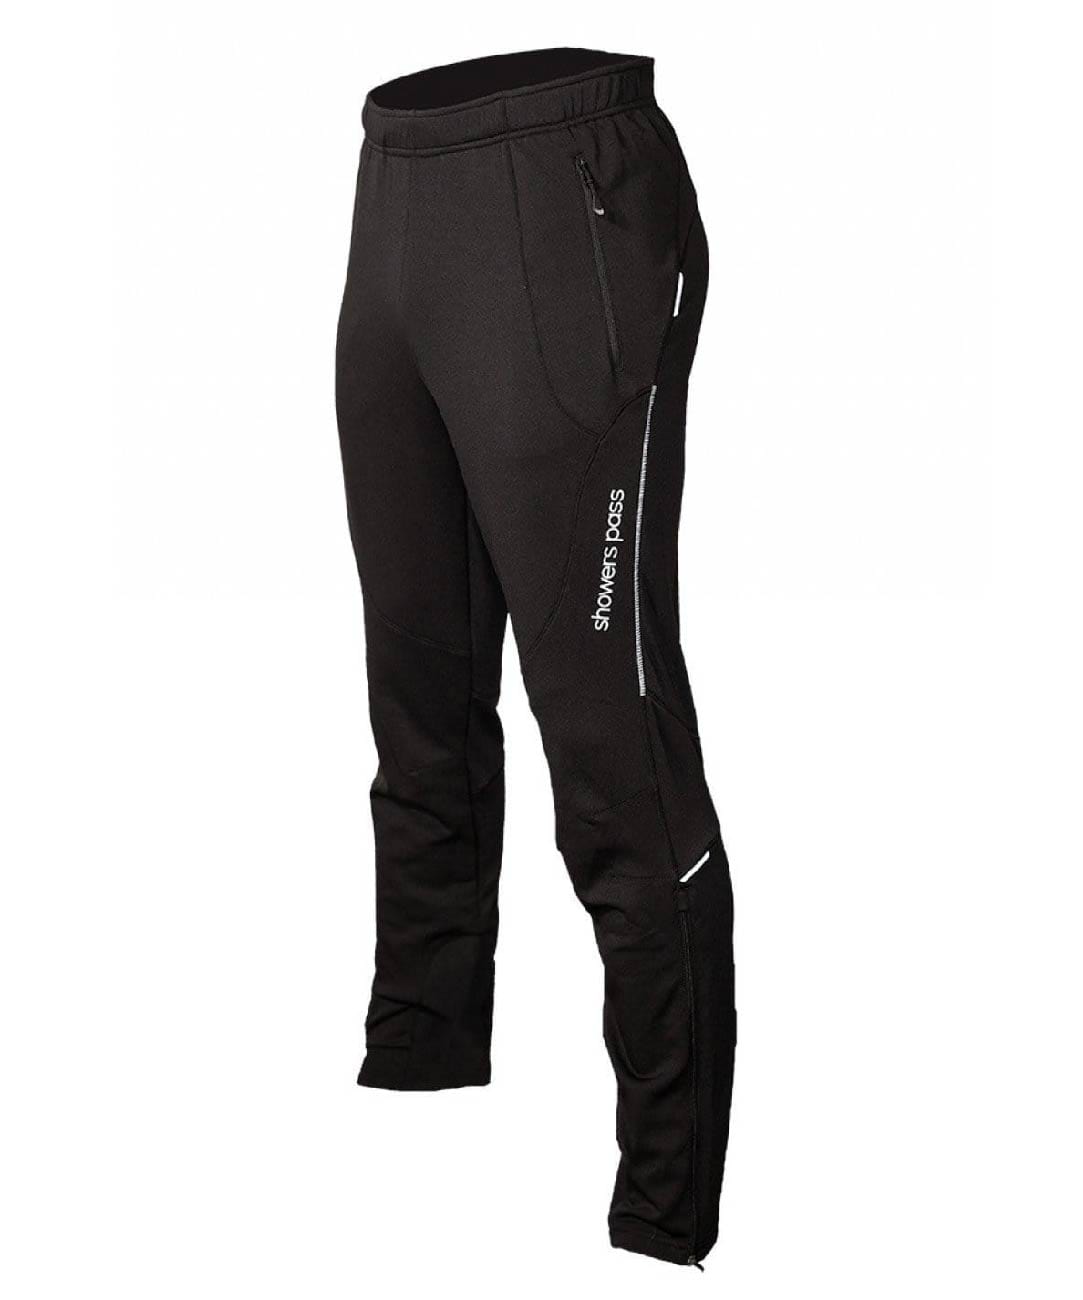  Showers Pass Men's Waterproof Breathable Skyline Multisport  Pants (Black - Small) : Athletic Pants : Clothing, Shoes & Jewelry